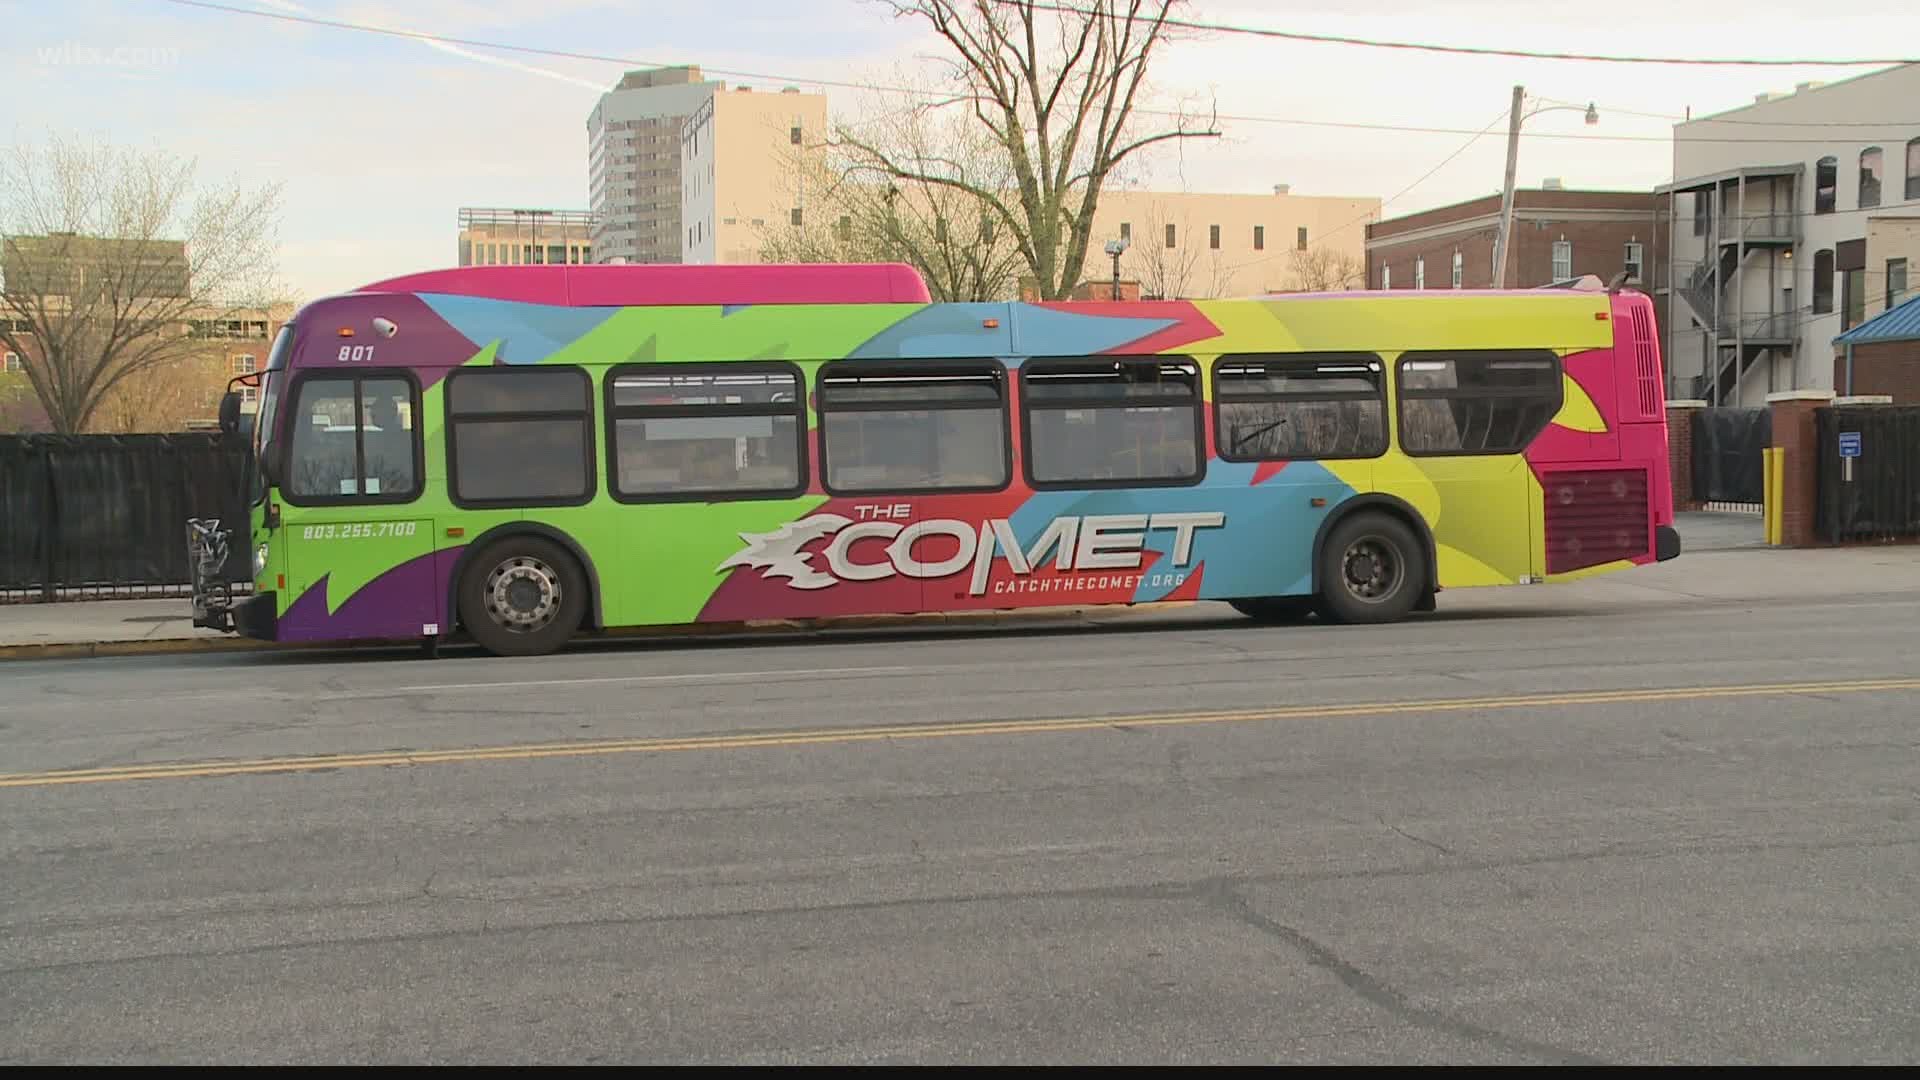 The COMET, the public transit system in Columbia, is geting $13.6 million. Here's how they plan to spend that money.